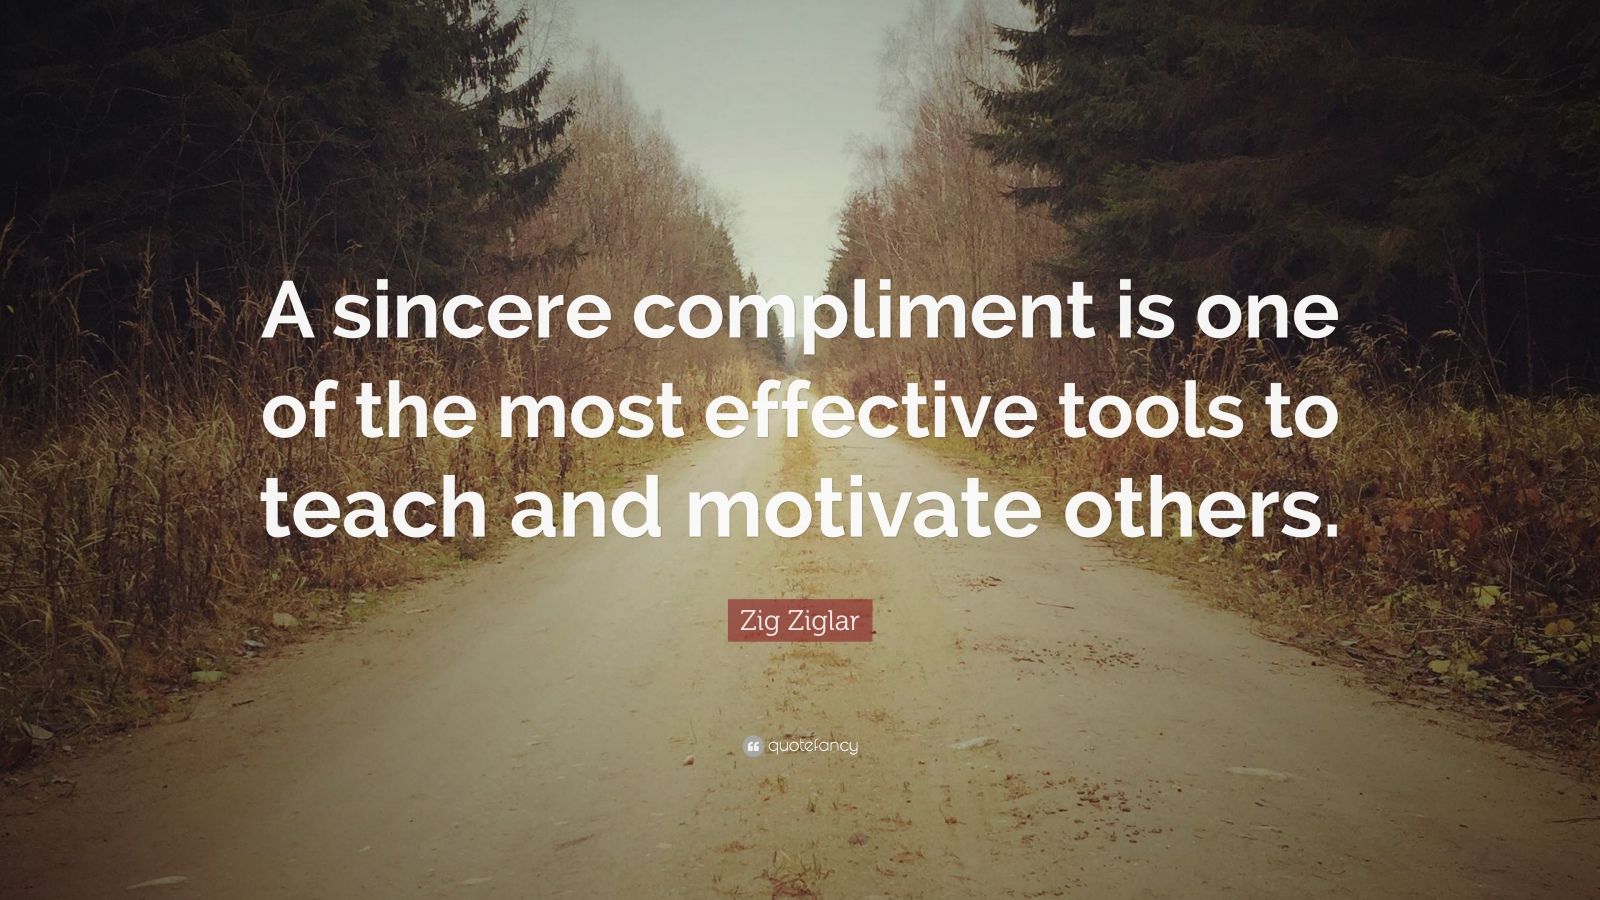 Zig Ziglar Quote: “A sincere compliment is one of the most effective